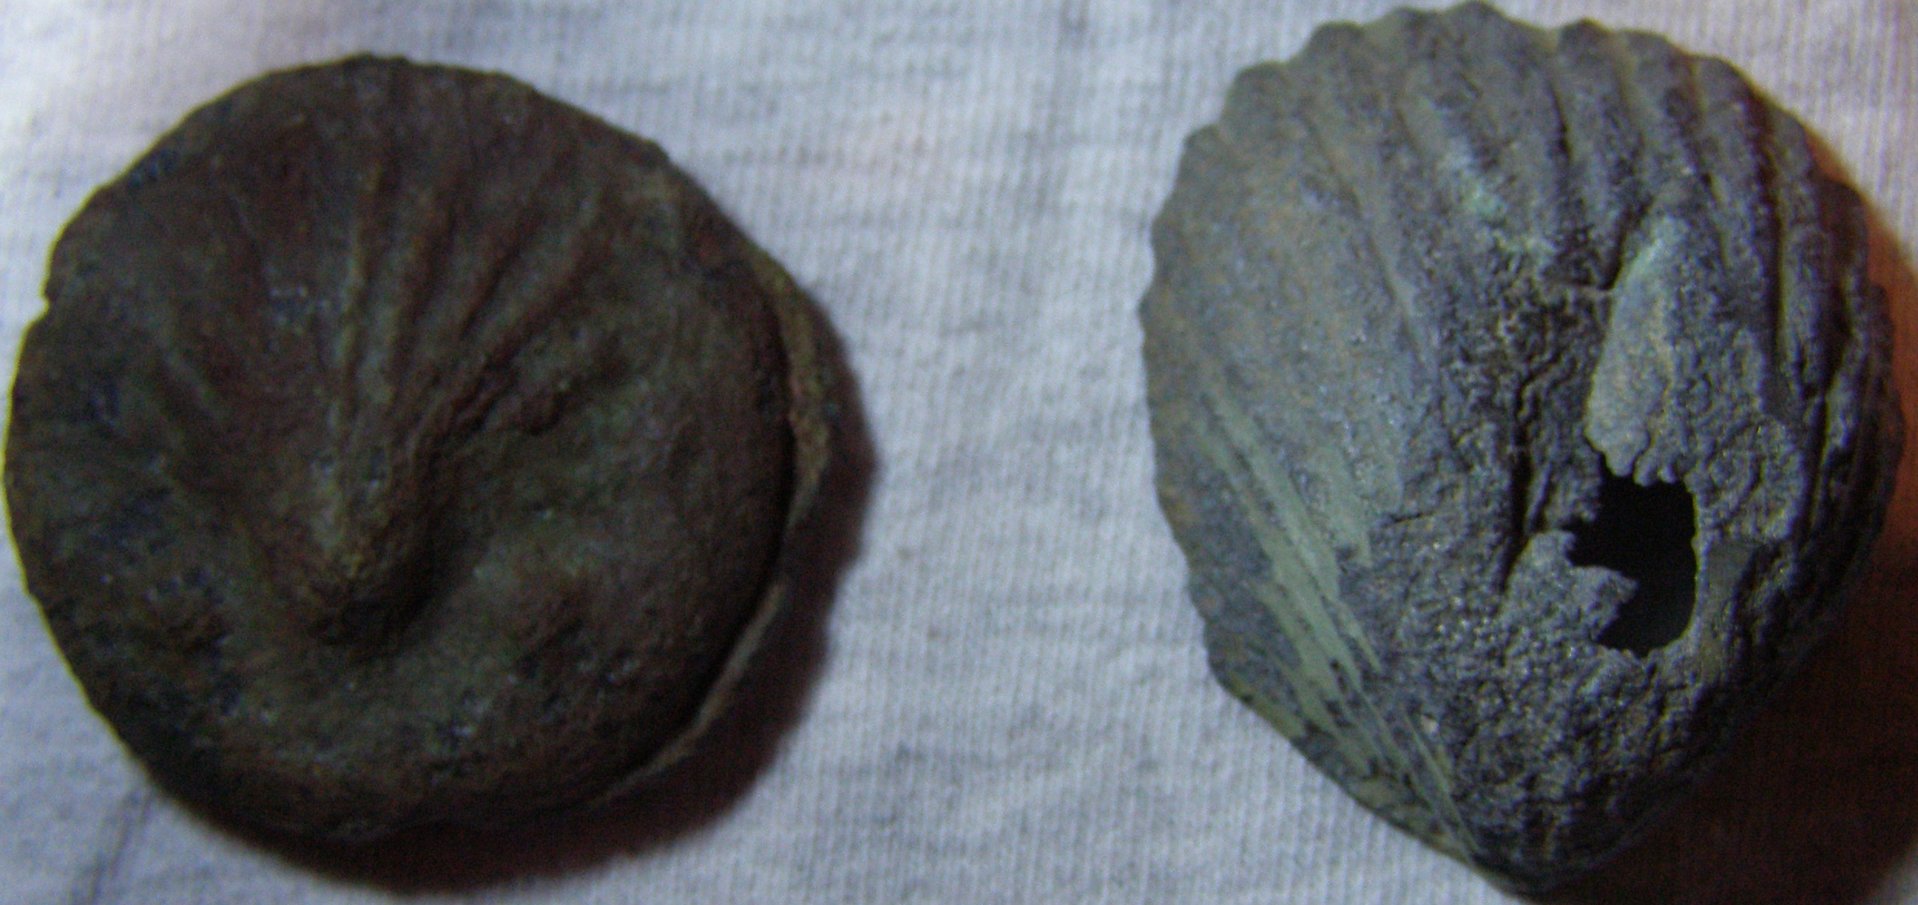 Sextans shell coin and shell.jpg